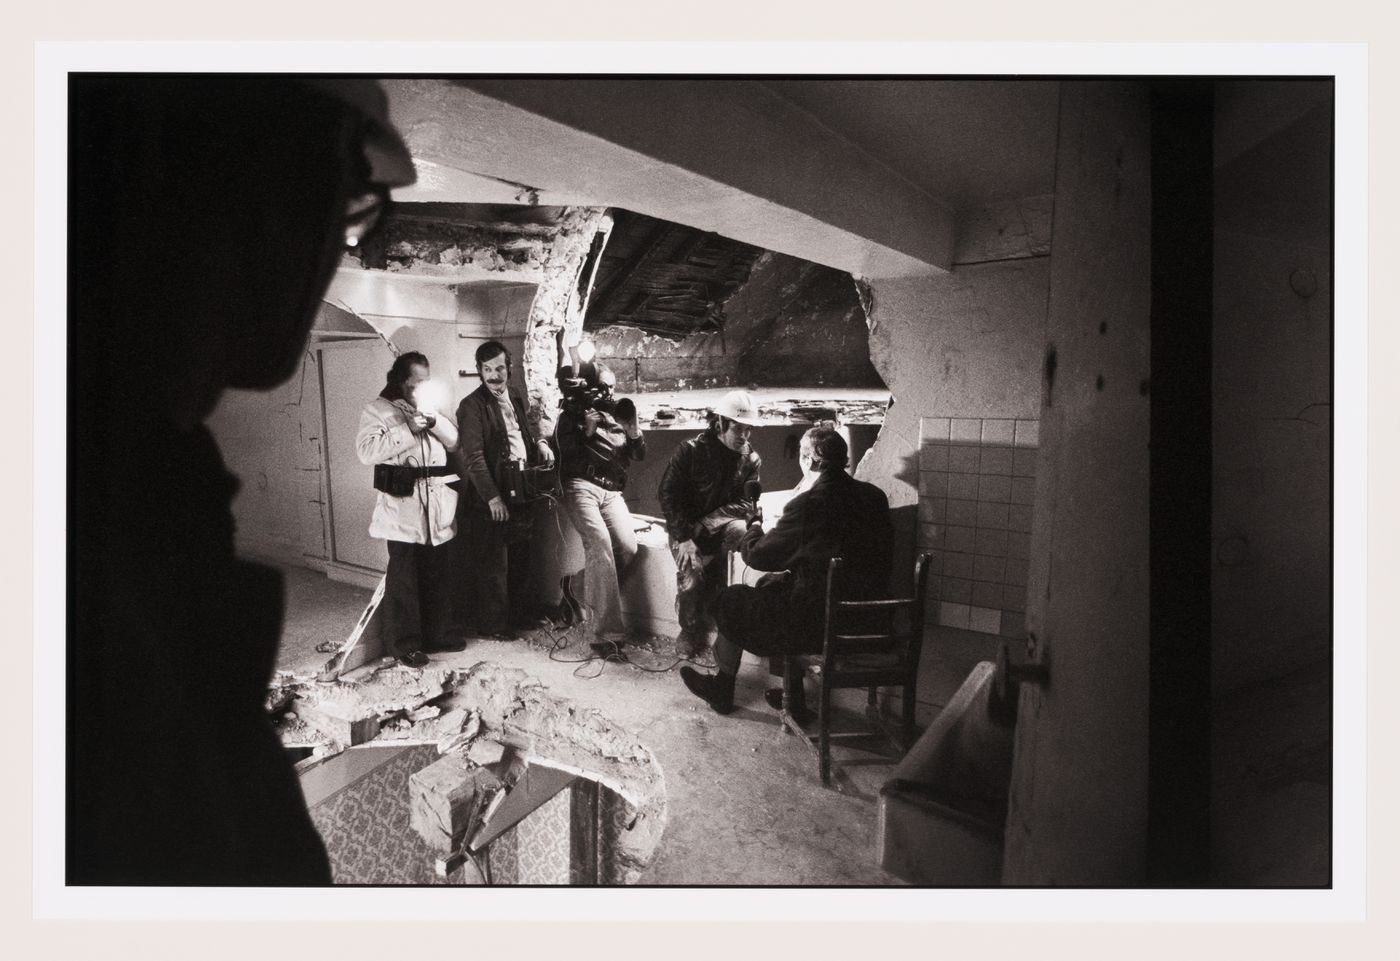 Interview with television crew with Gordon Matta-Clark in Conical Intersect, Paris